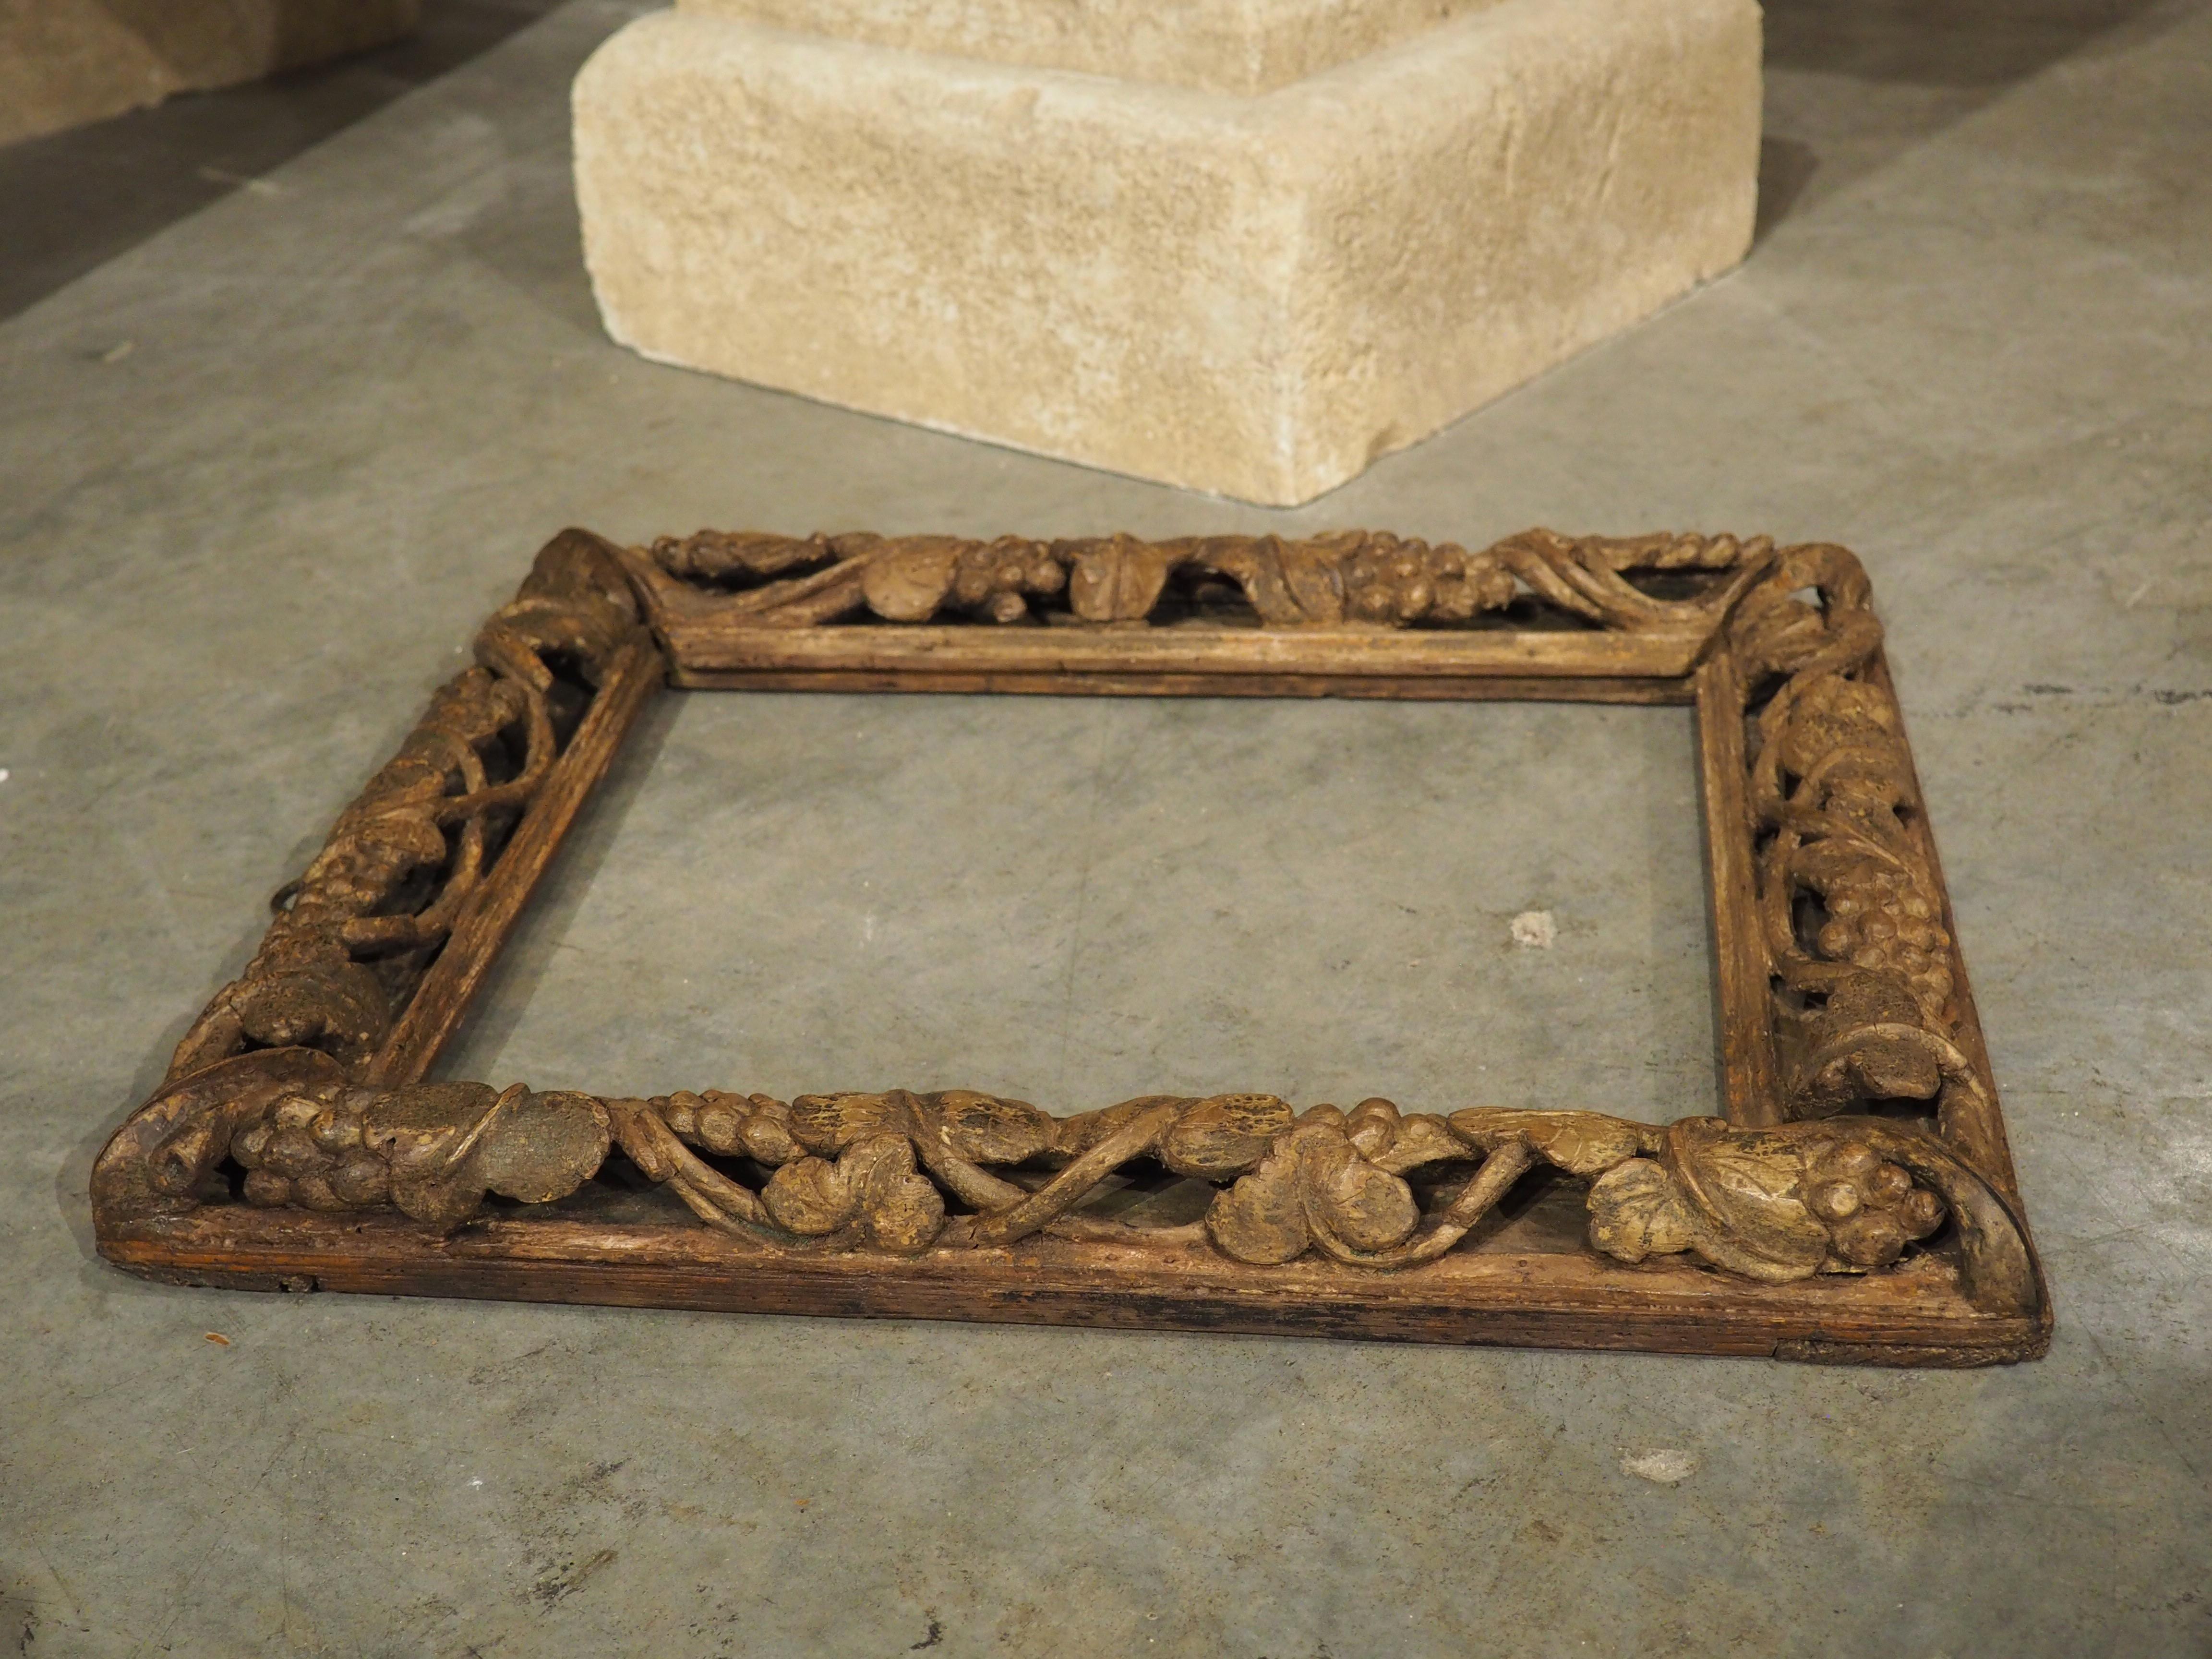 Renaissance Superb 16th Century Carved Wooden Frame with Pierced Grapevine Frieze For Sale